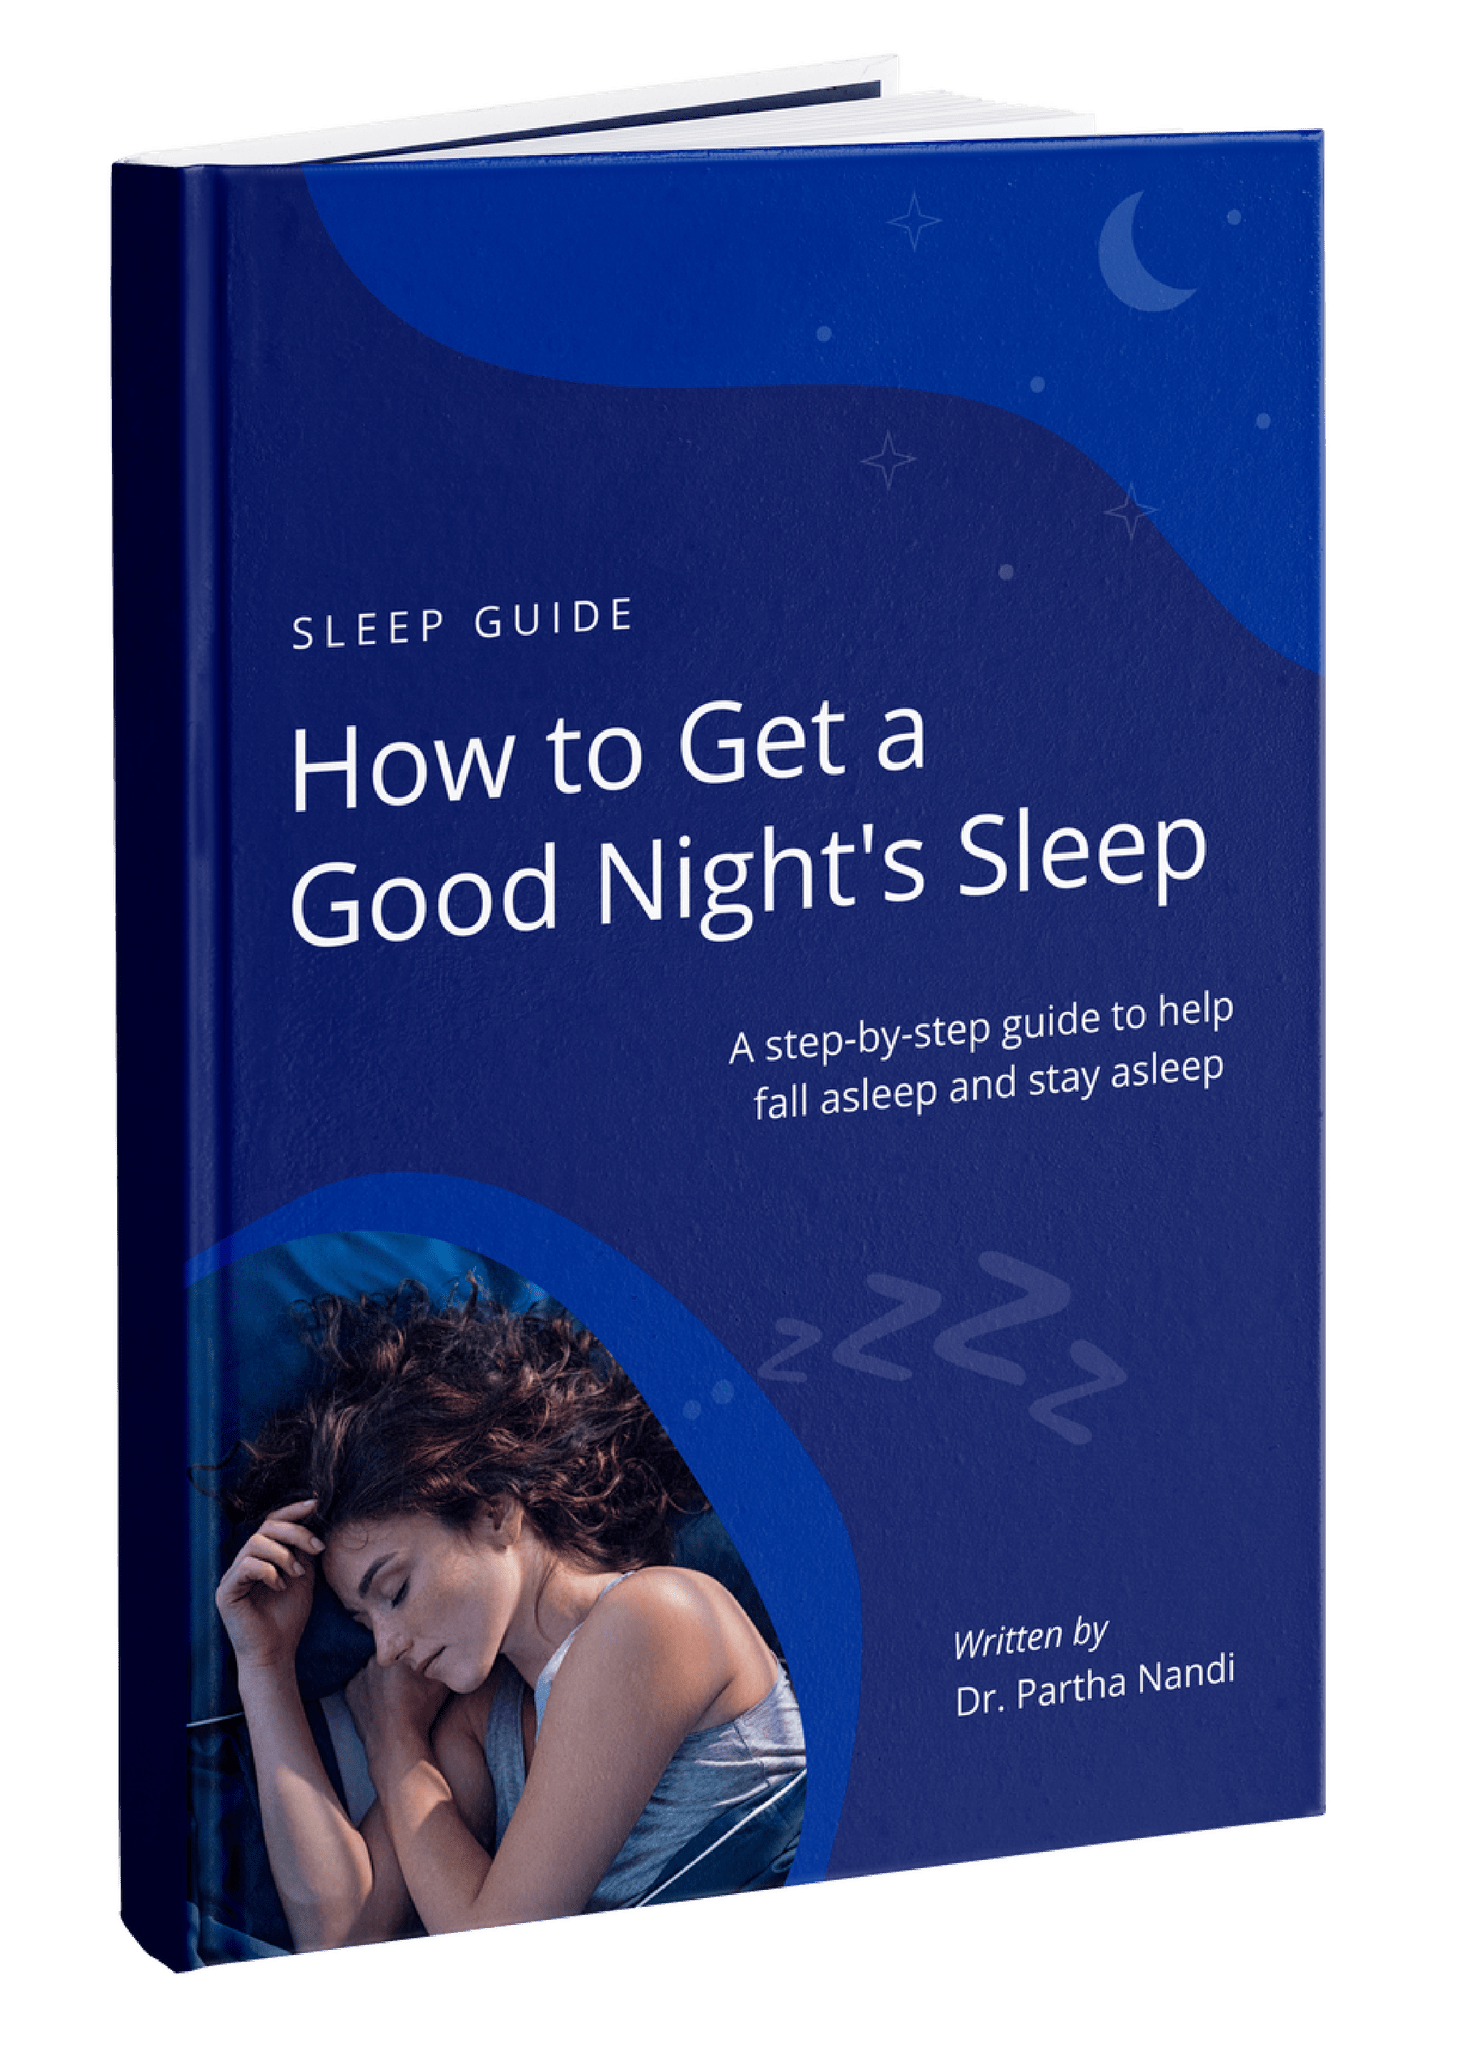 How To Get A Goodnights Sleep A Step By Step Guide To Help Fall Asleep And Stay Asleep